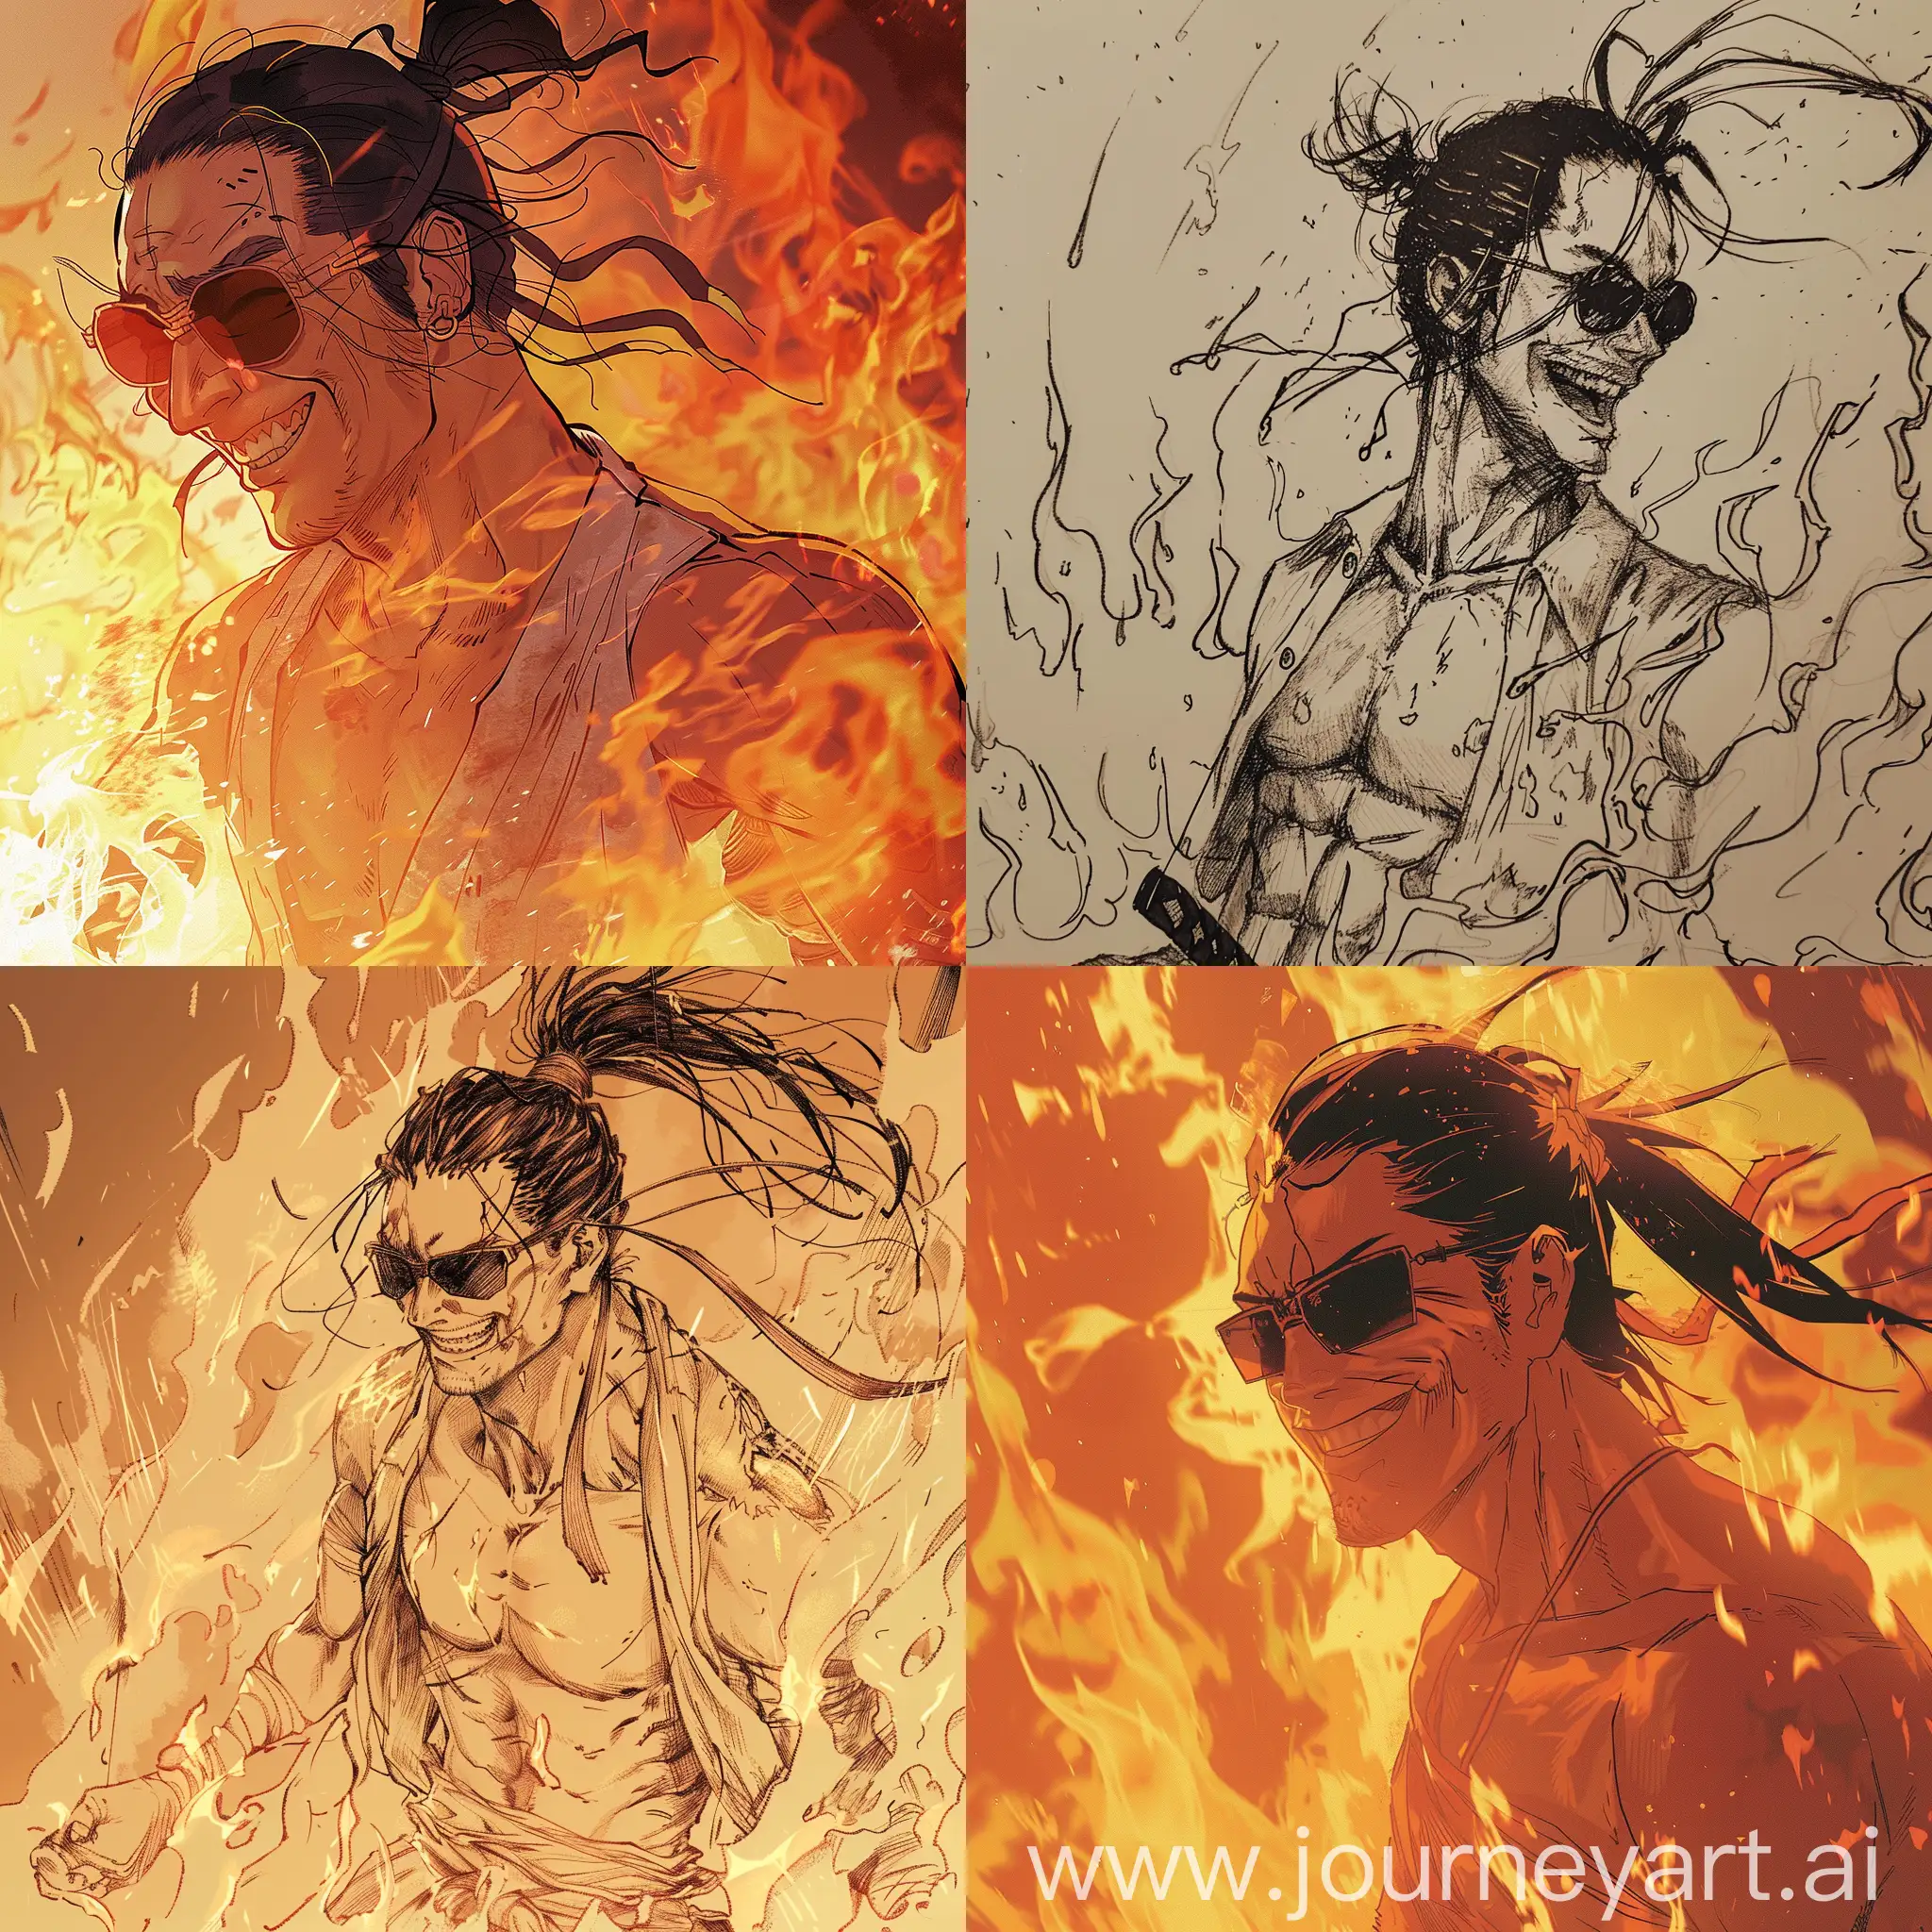 A samurai with his hair tied and wearing sunglasses is standing in the flames and smiling. He has an incredible physique. He is young and thin. We see it from the side, his face is not fully visible. Hand-drawn with a maniacal hell theme